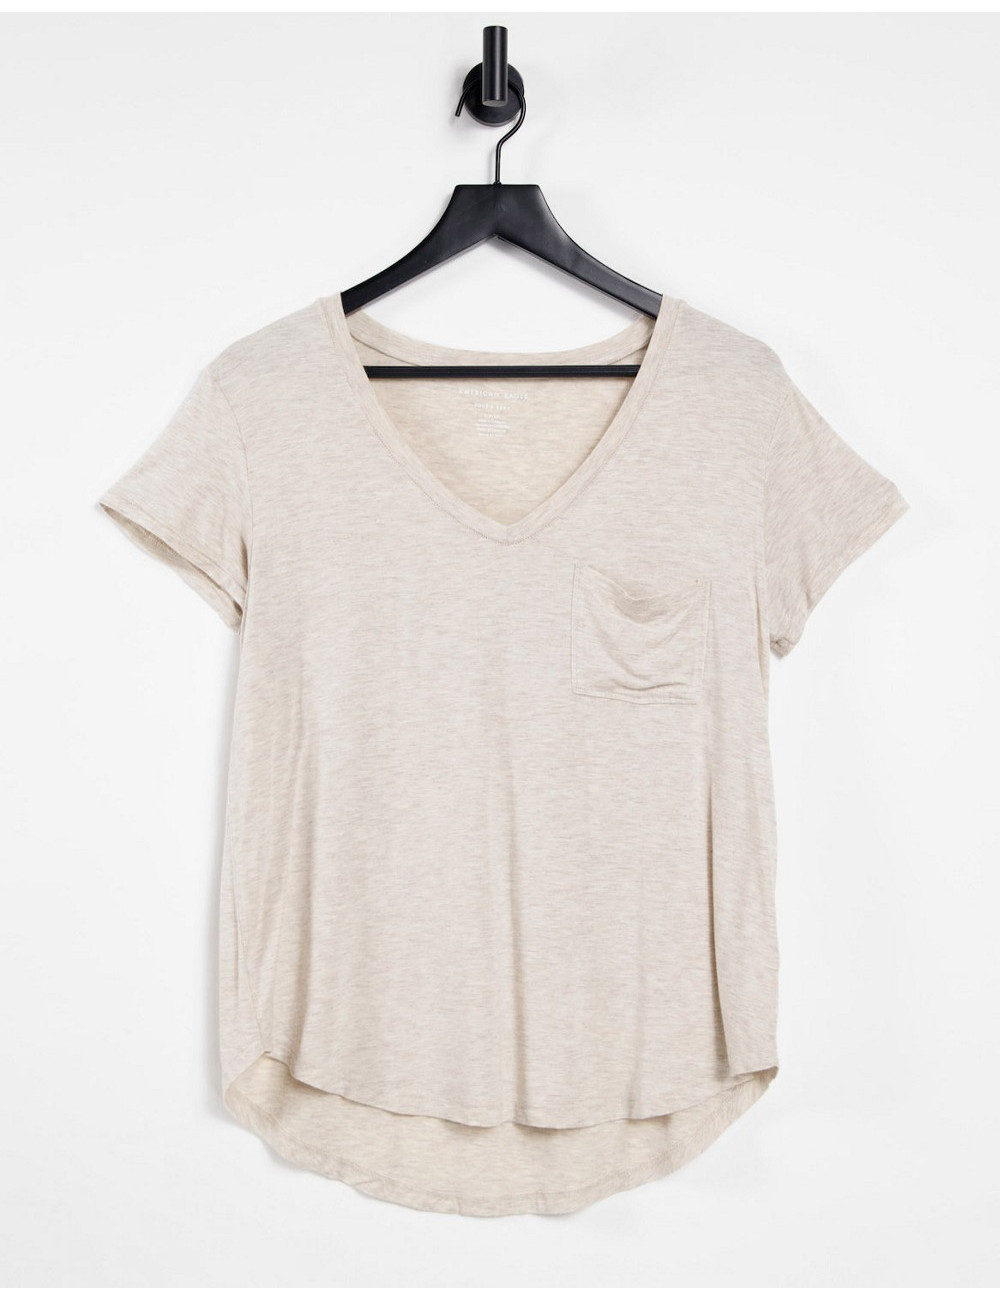 American Eagle t shirt with...